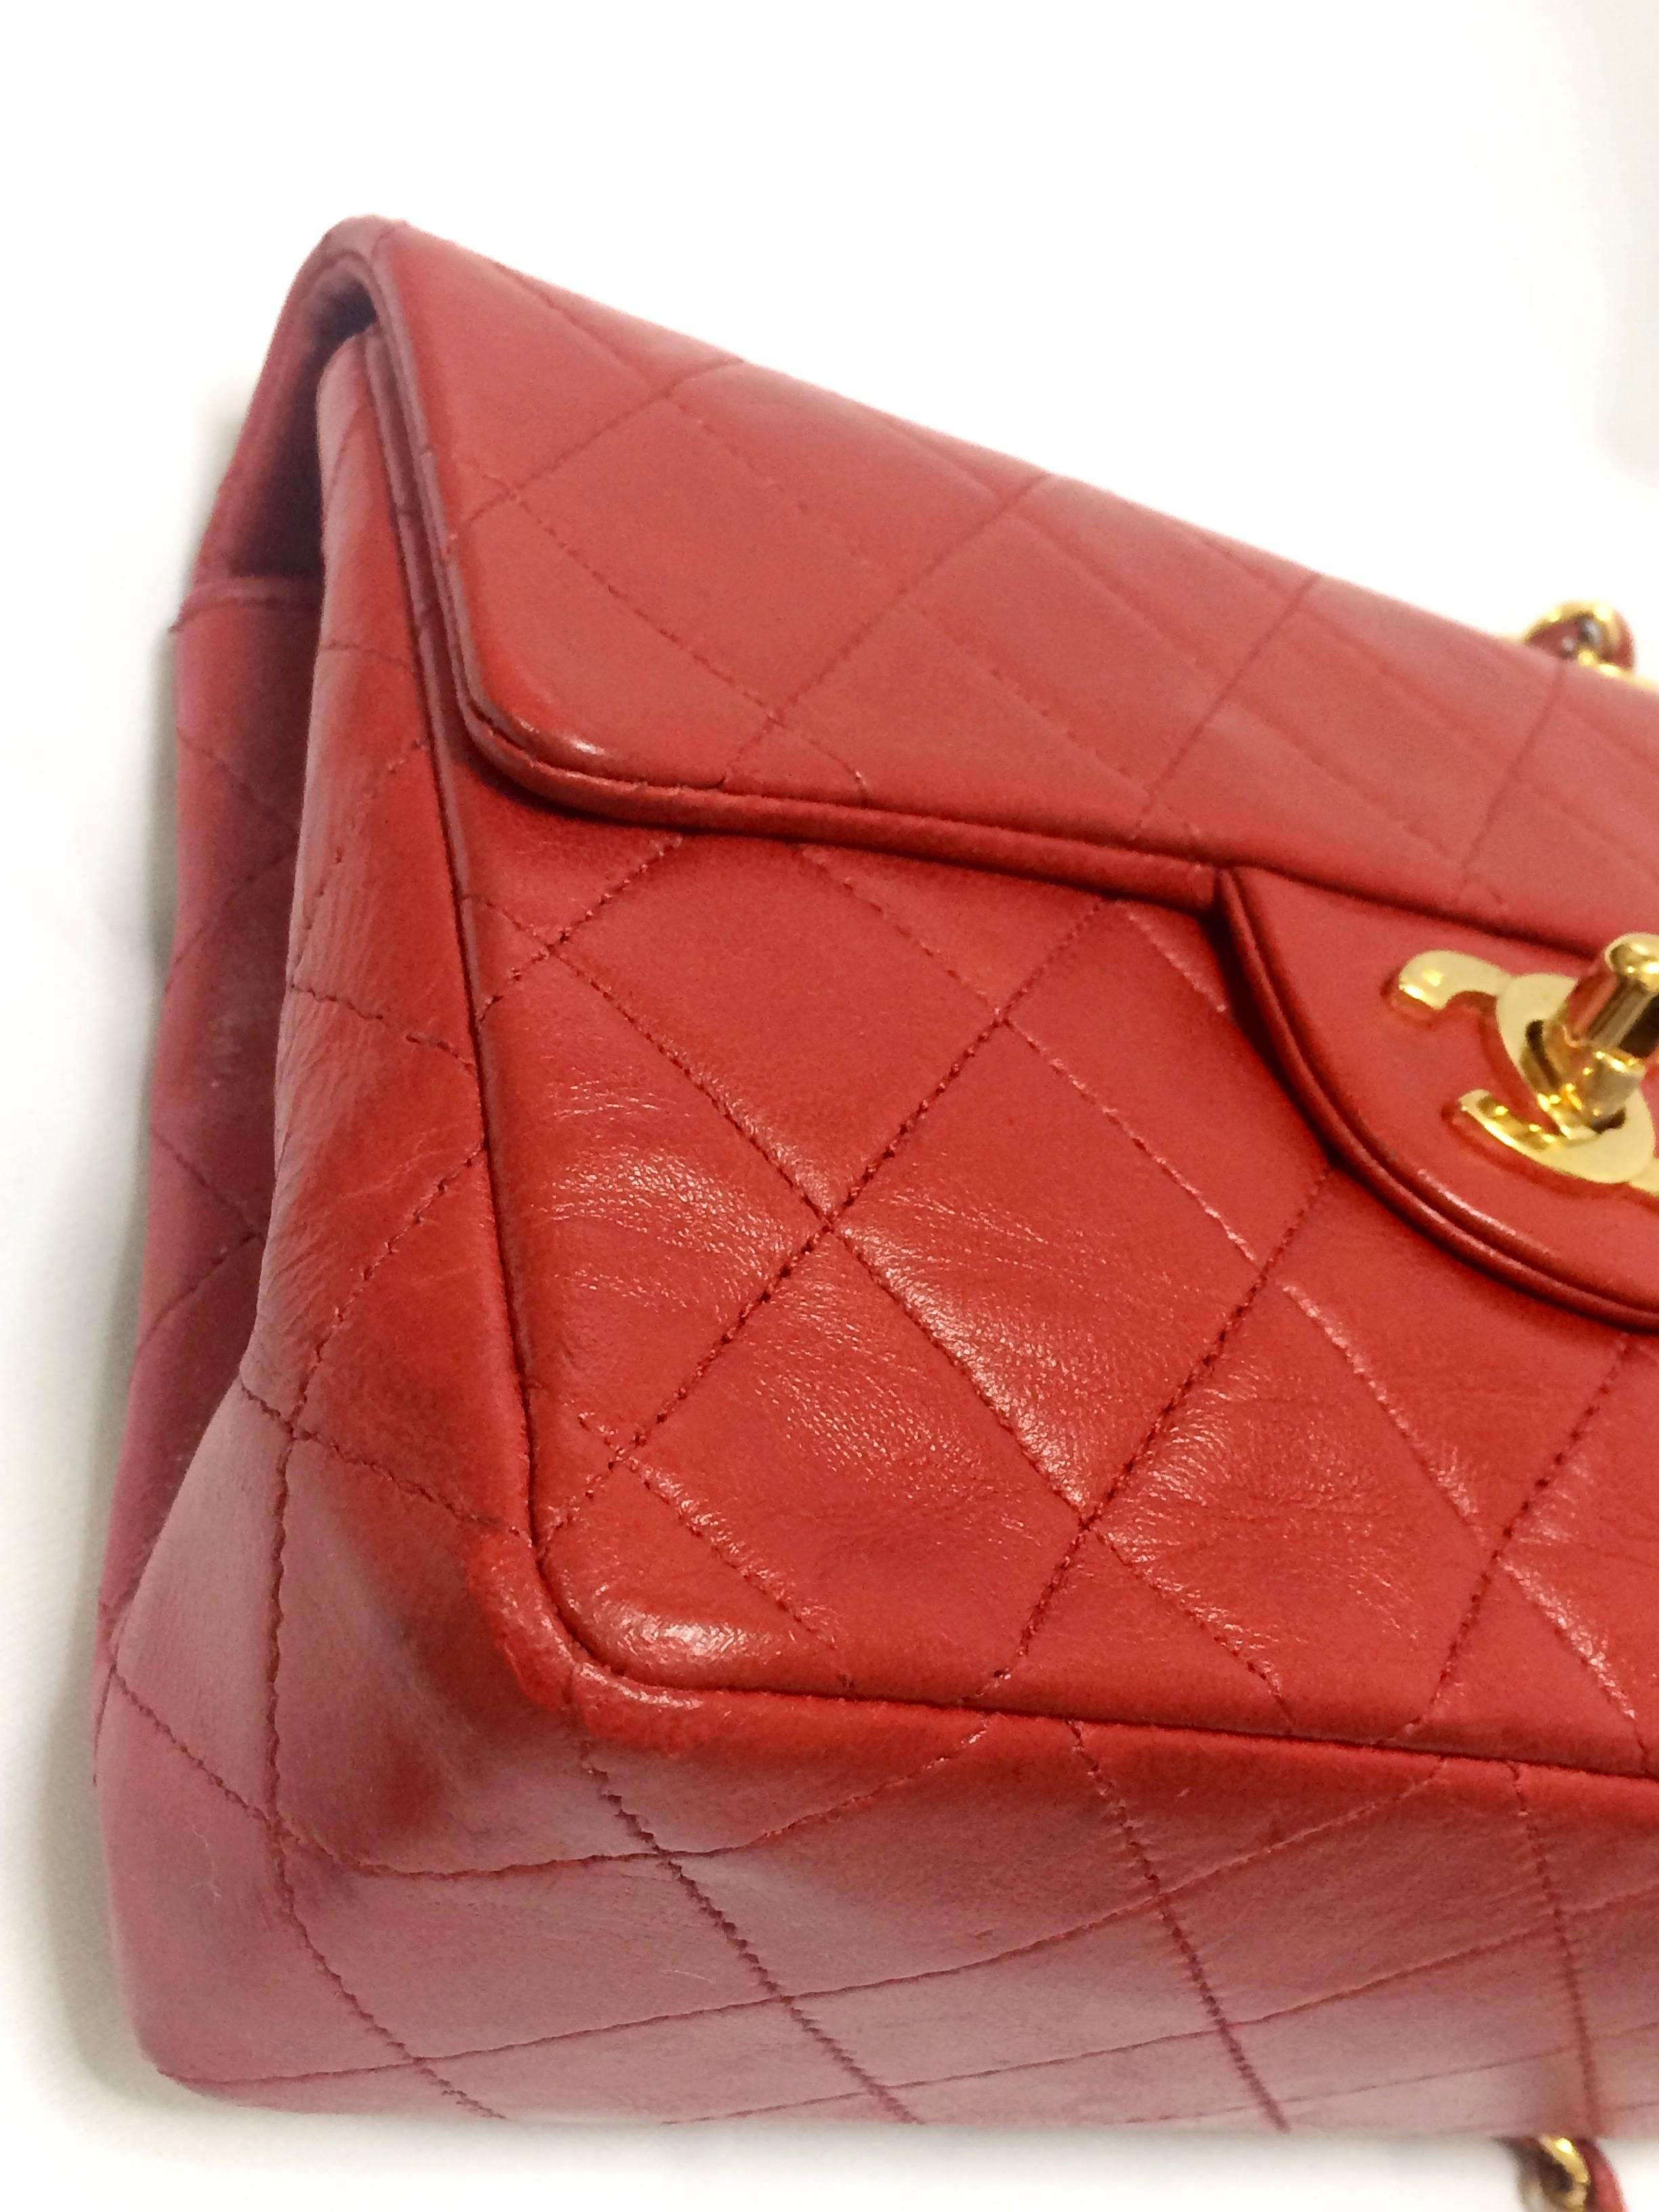 Women's Vintage CHANEL lipstick red lambskin purse with golden CC and chain strap.